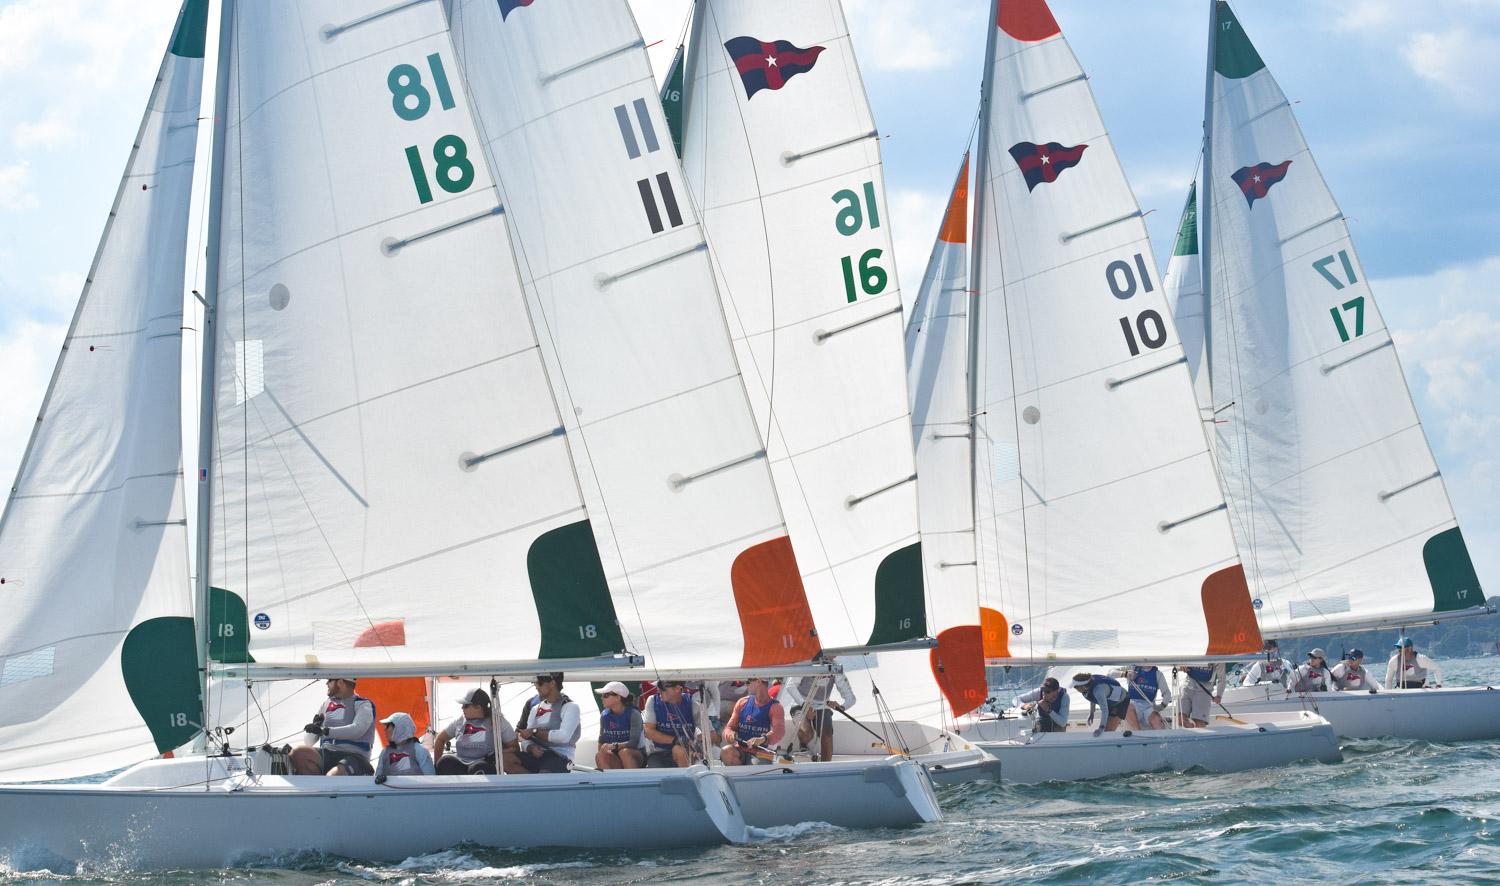 Team Racing to reunite in Newport for New York Yacht Club's Trios